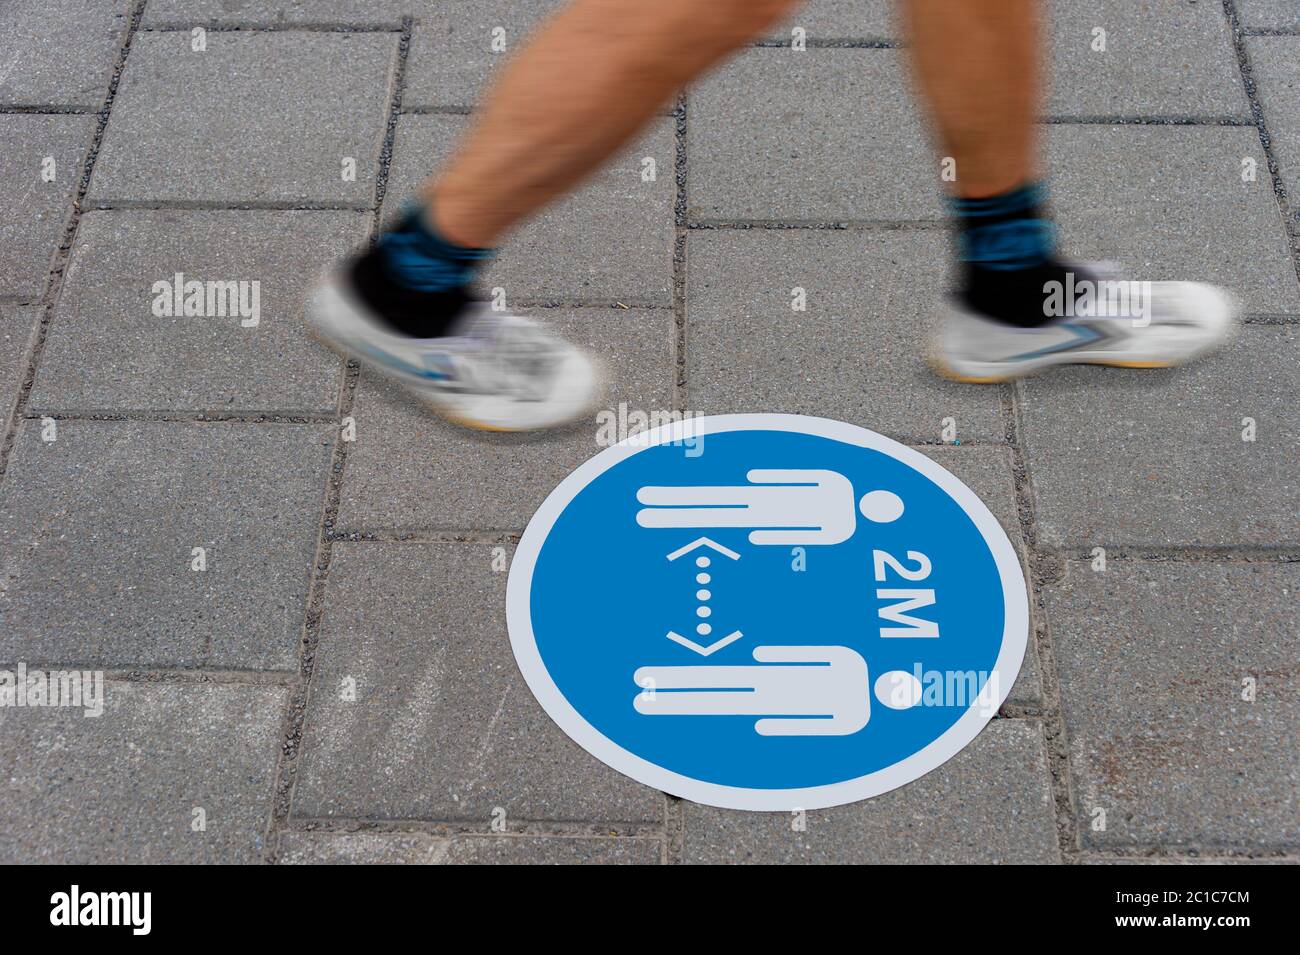 Sign printed on ground informing people to keep a 2 meter distance from each other during Covid-19 pandemic. Stock Photo